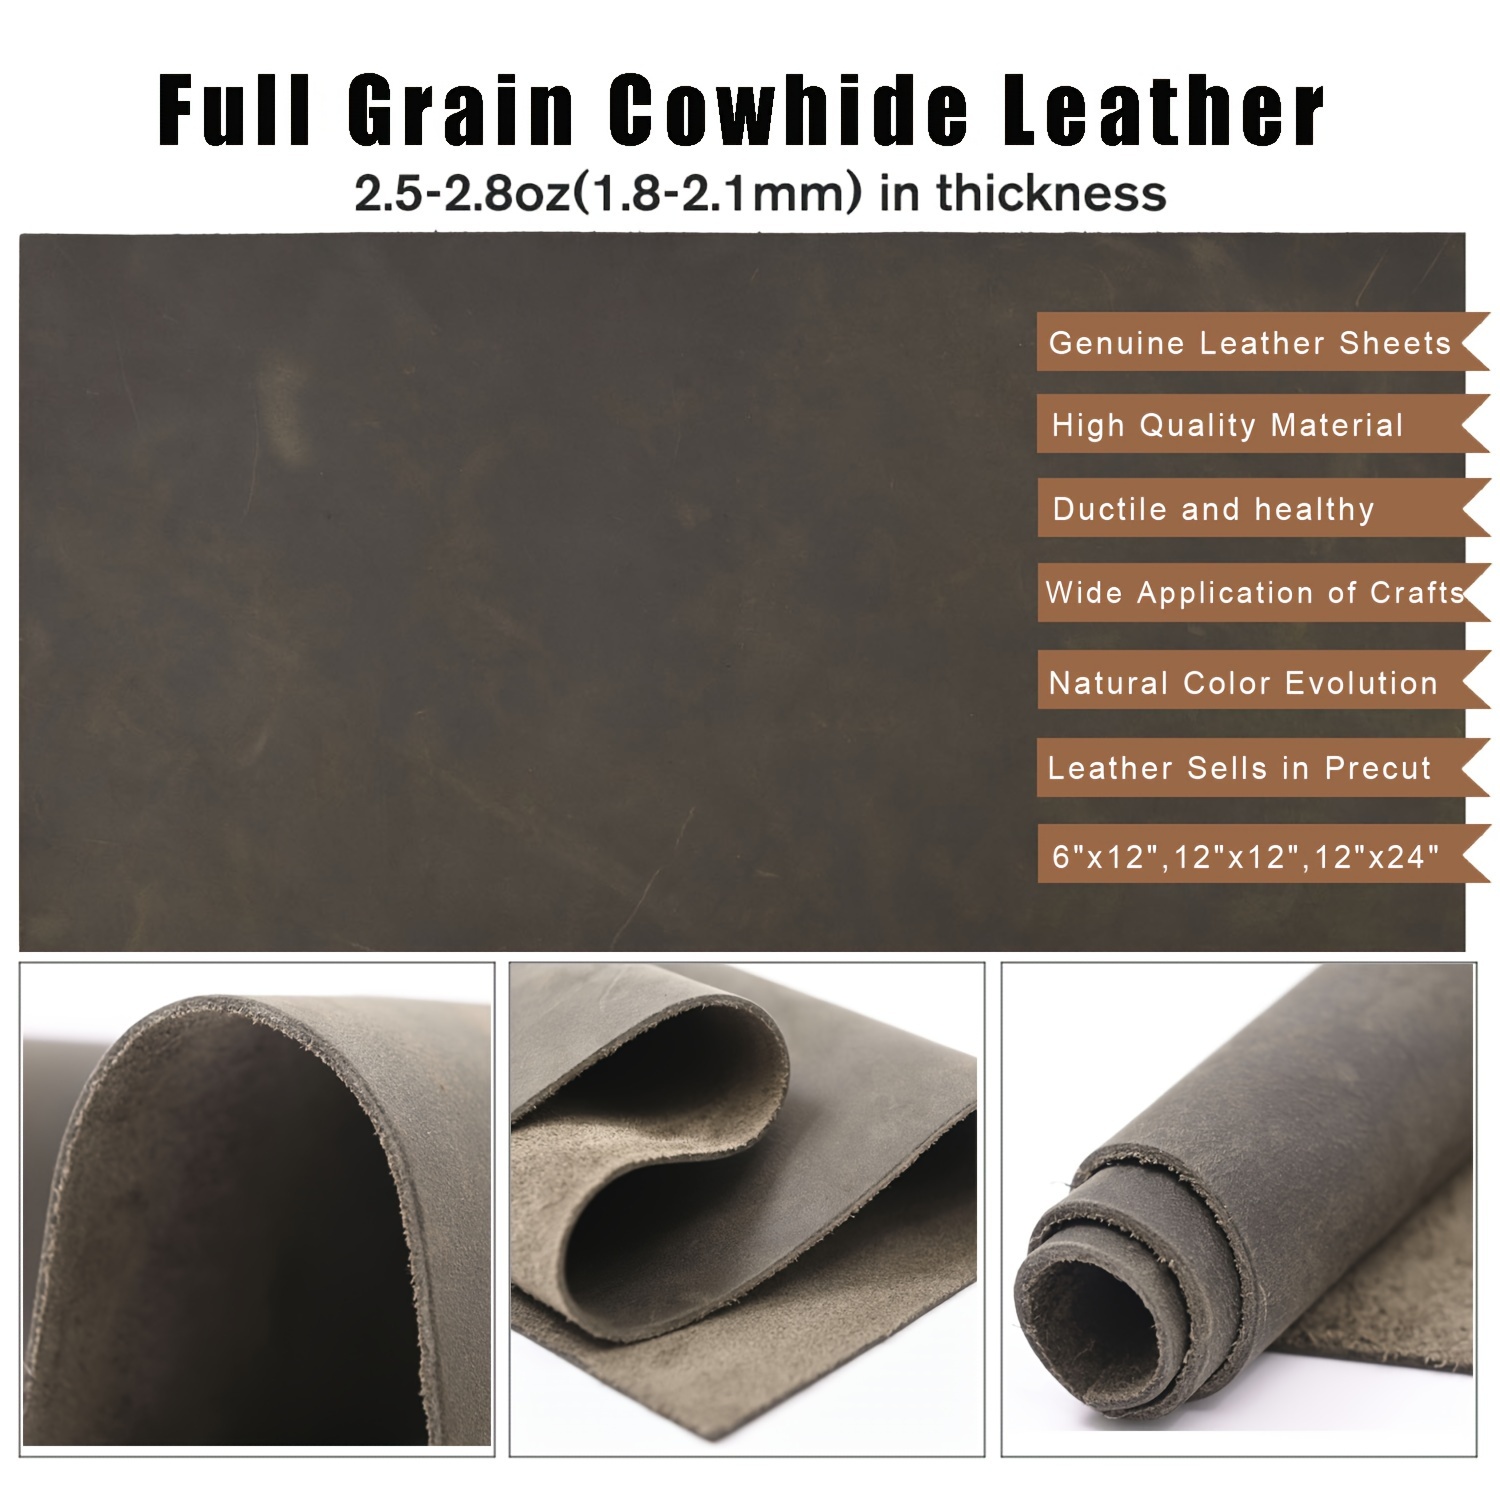 Bovine Leather Pieces, Pre Cut DIY Panels, Sheets for Crafts and